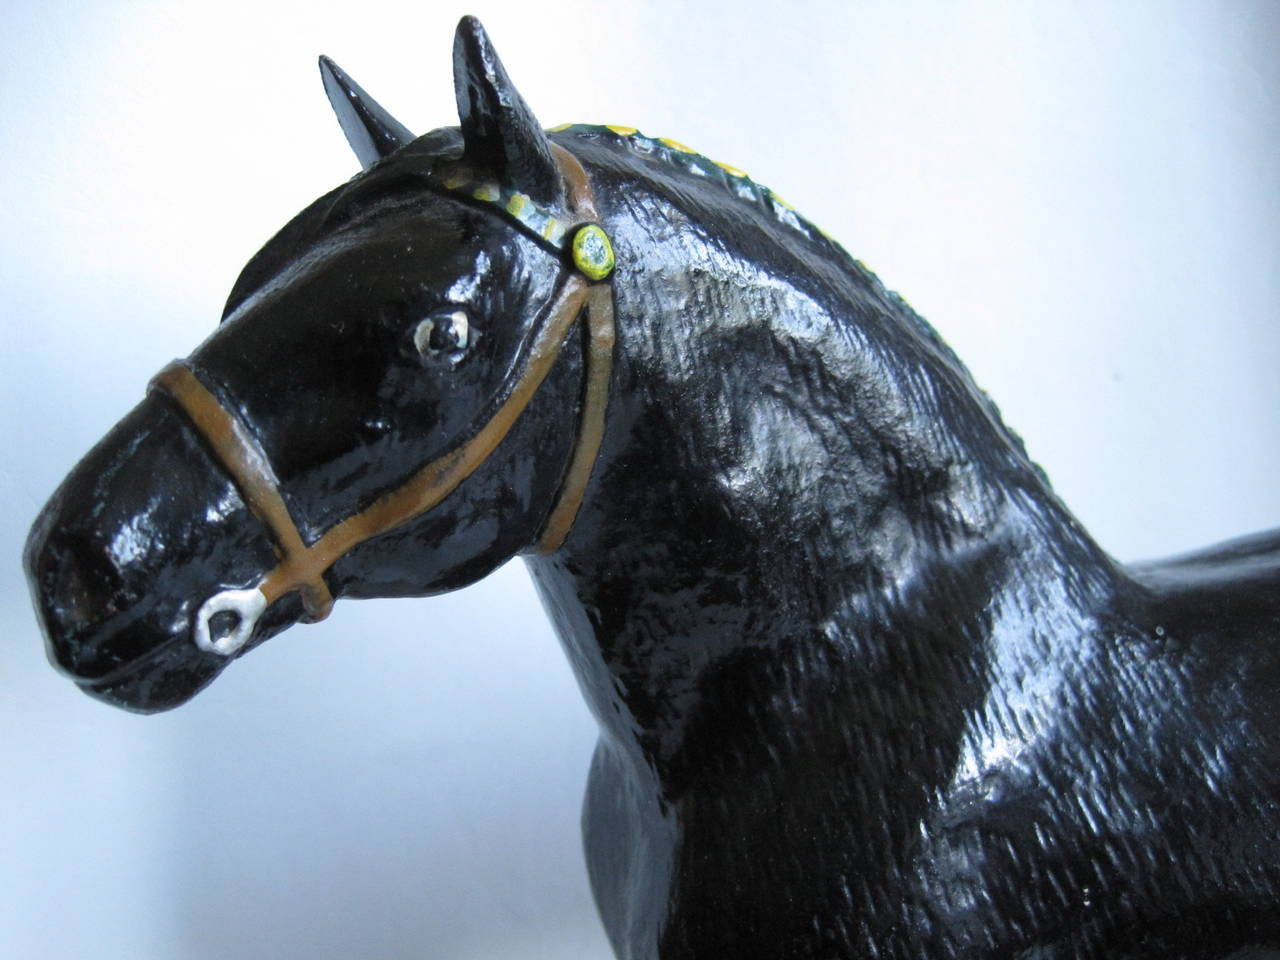 Signed cast Iron horse sculpture by Ross Butller for Dawes Black Horse Ale.

Free shipping within the United States and Canada.

As visual merchandising evolved, more and more companies began providing material to promote their products. Dawes